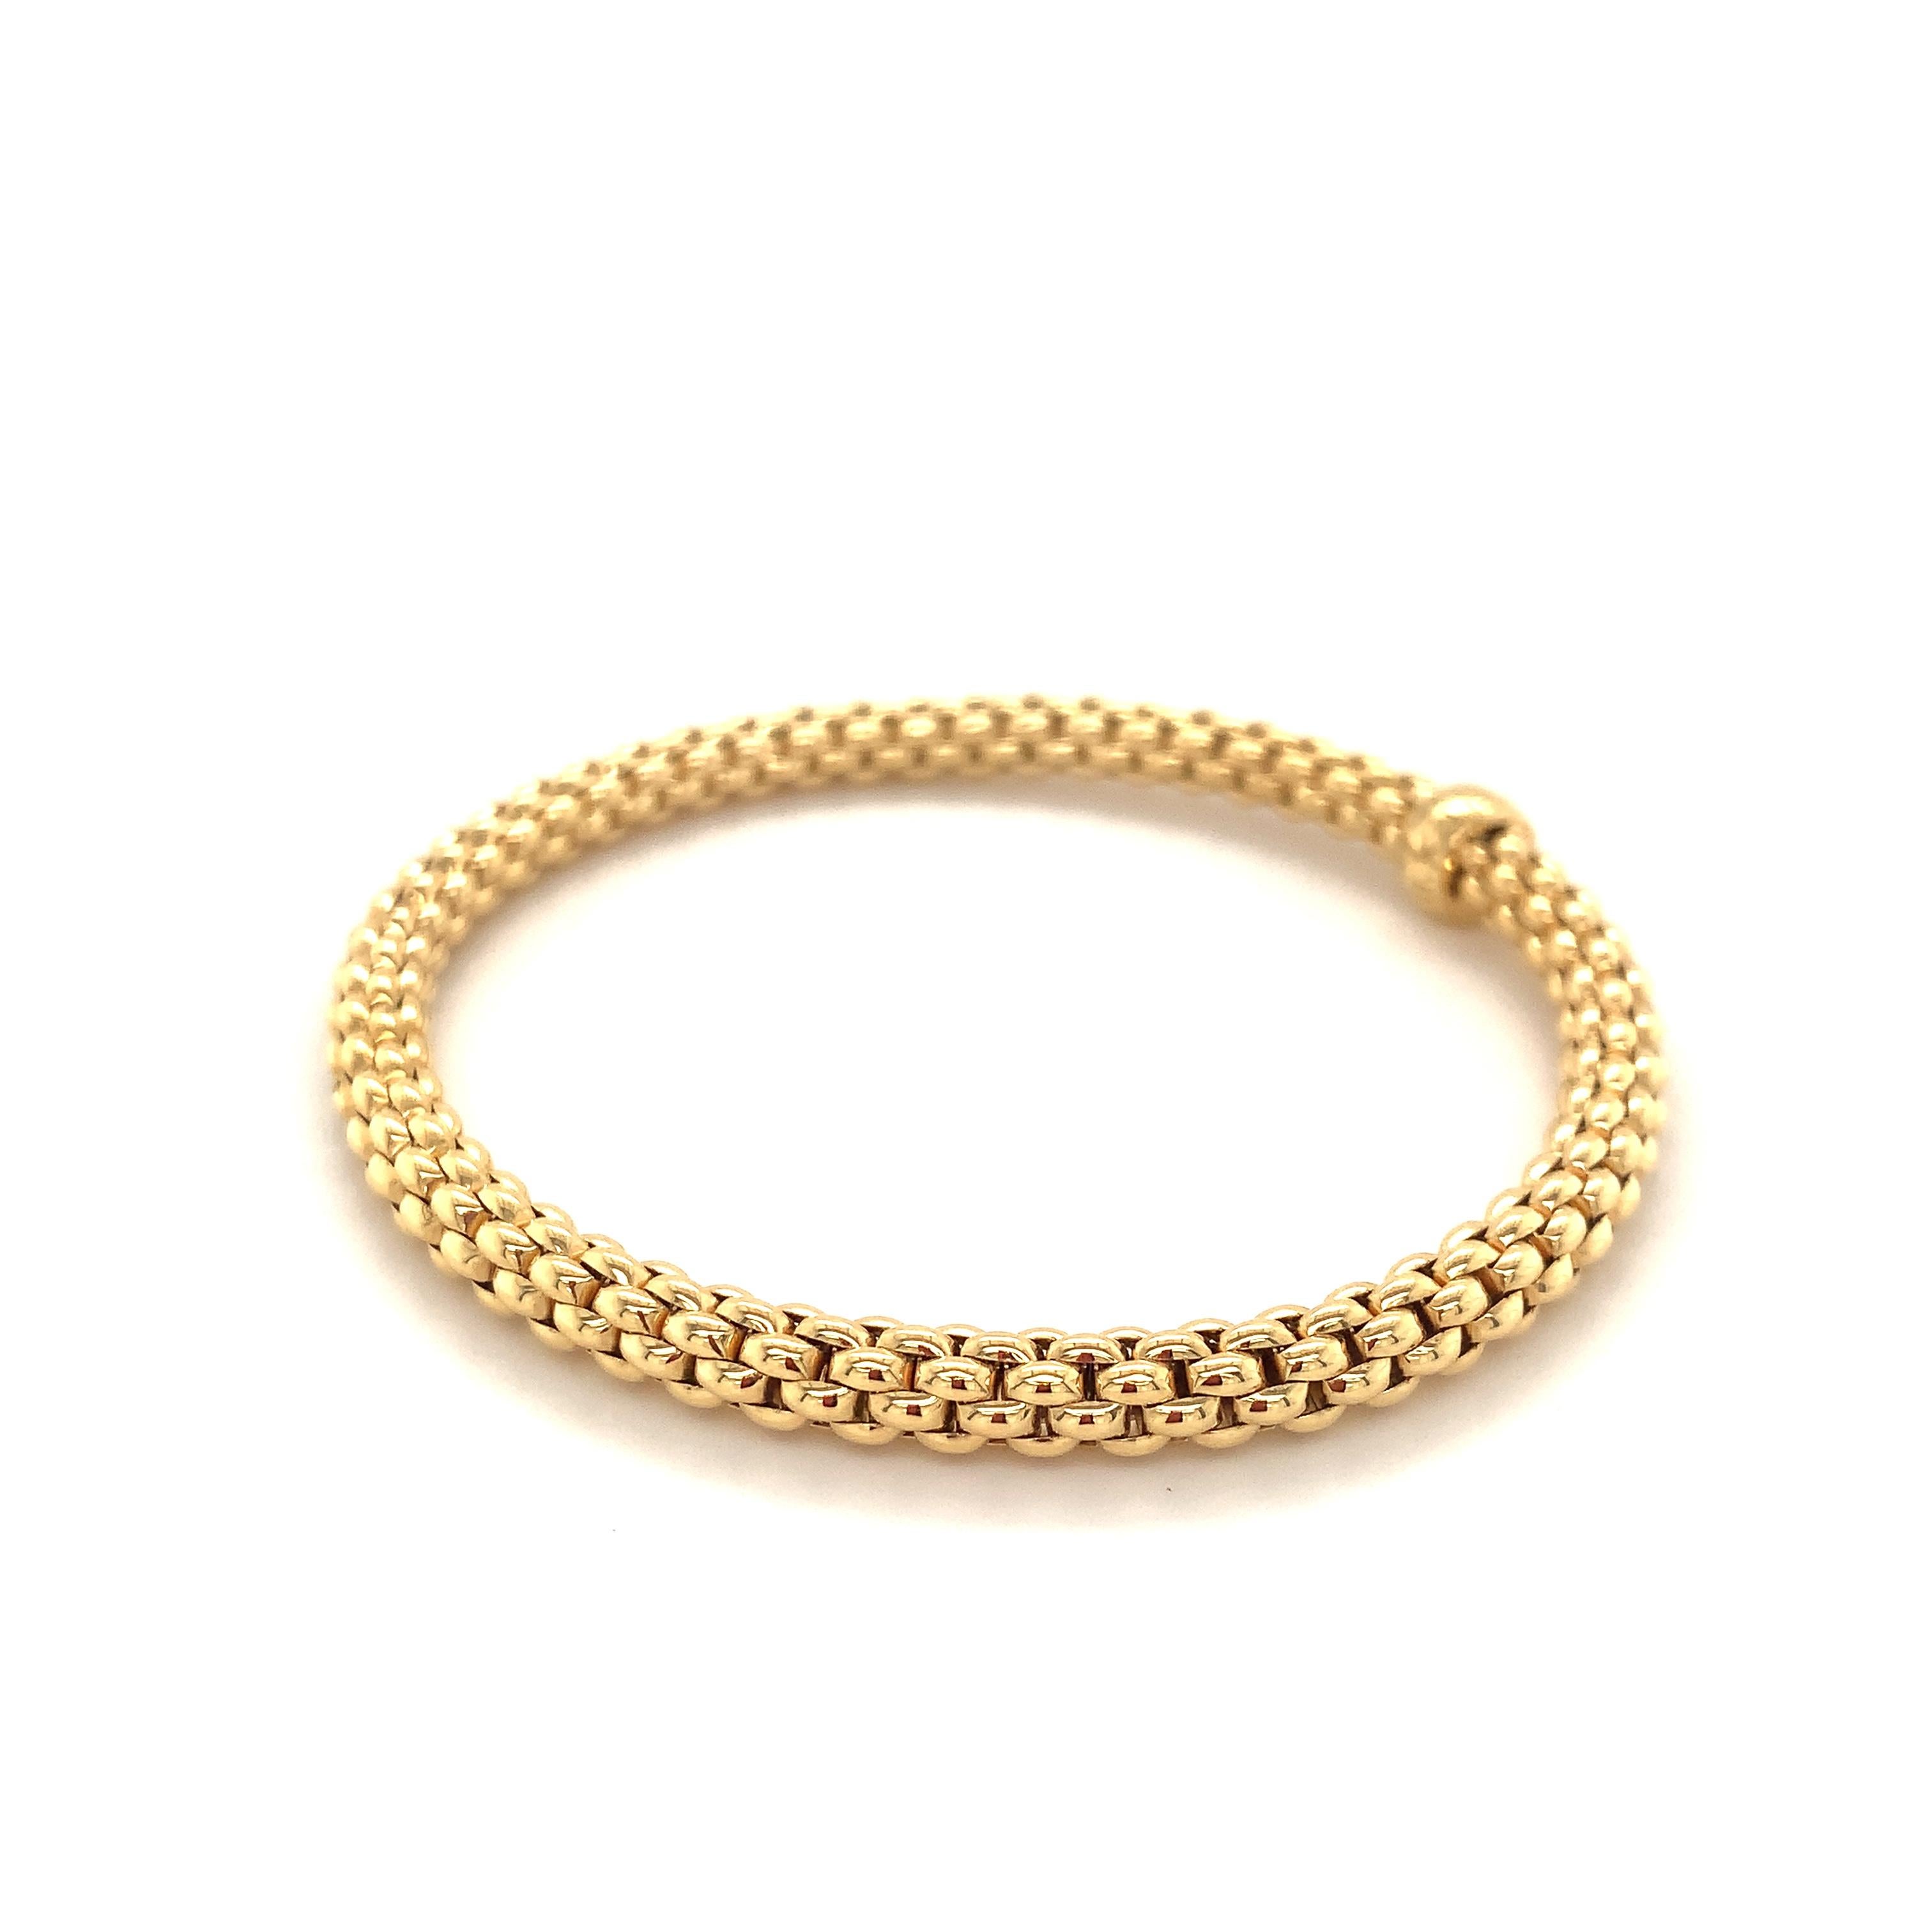 Fope Bracelet 18K Yellow Gold with Solid Gold Rondel 620BM-G 12